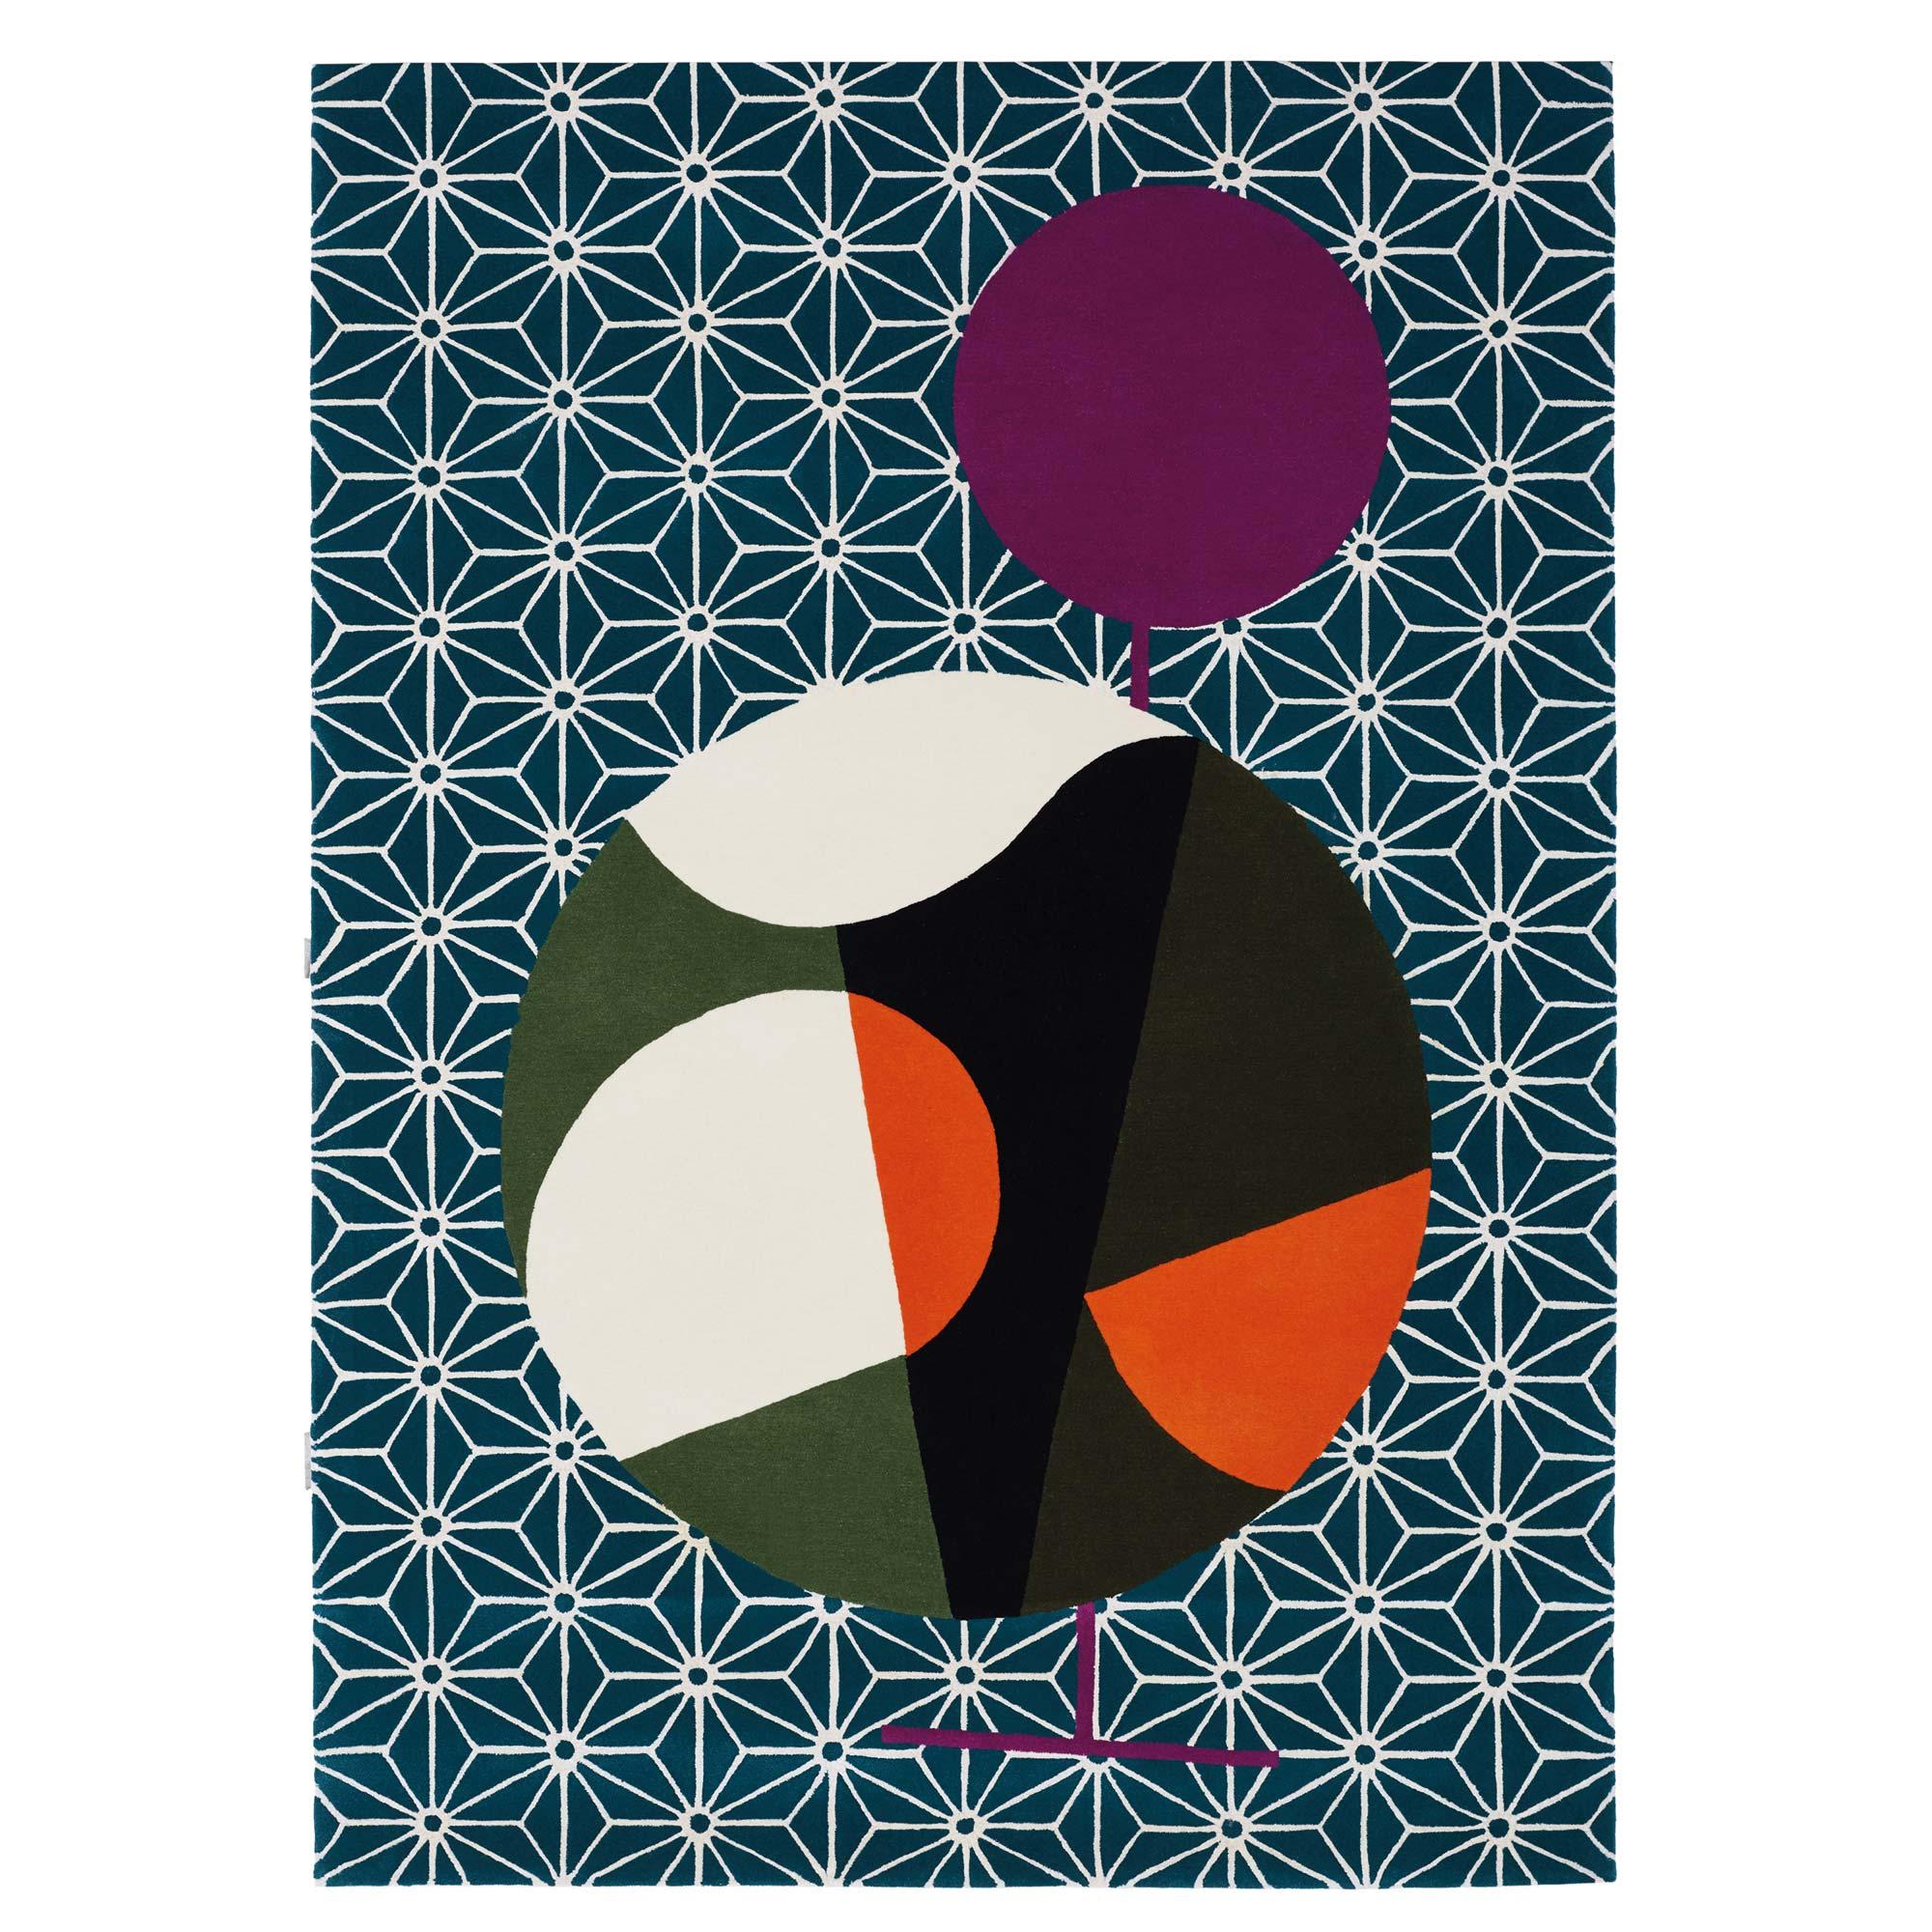 Japanese Abstractions N°4 rug by Thomas Dariel 
Dimensions: D 170 x W 240 cm 
Materials: New Zealand Wool and Viscose. 
Also available in other colors, designs, and dimensions. 


Japanese Abstractions is a collection of nine pieces, all